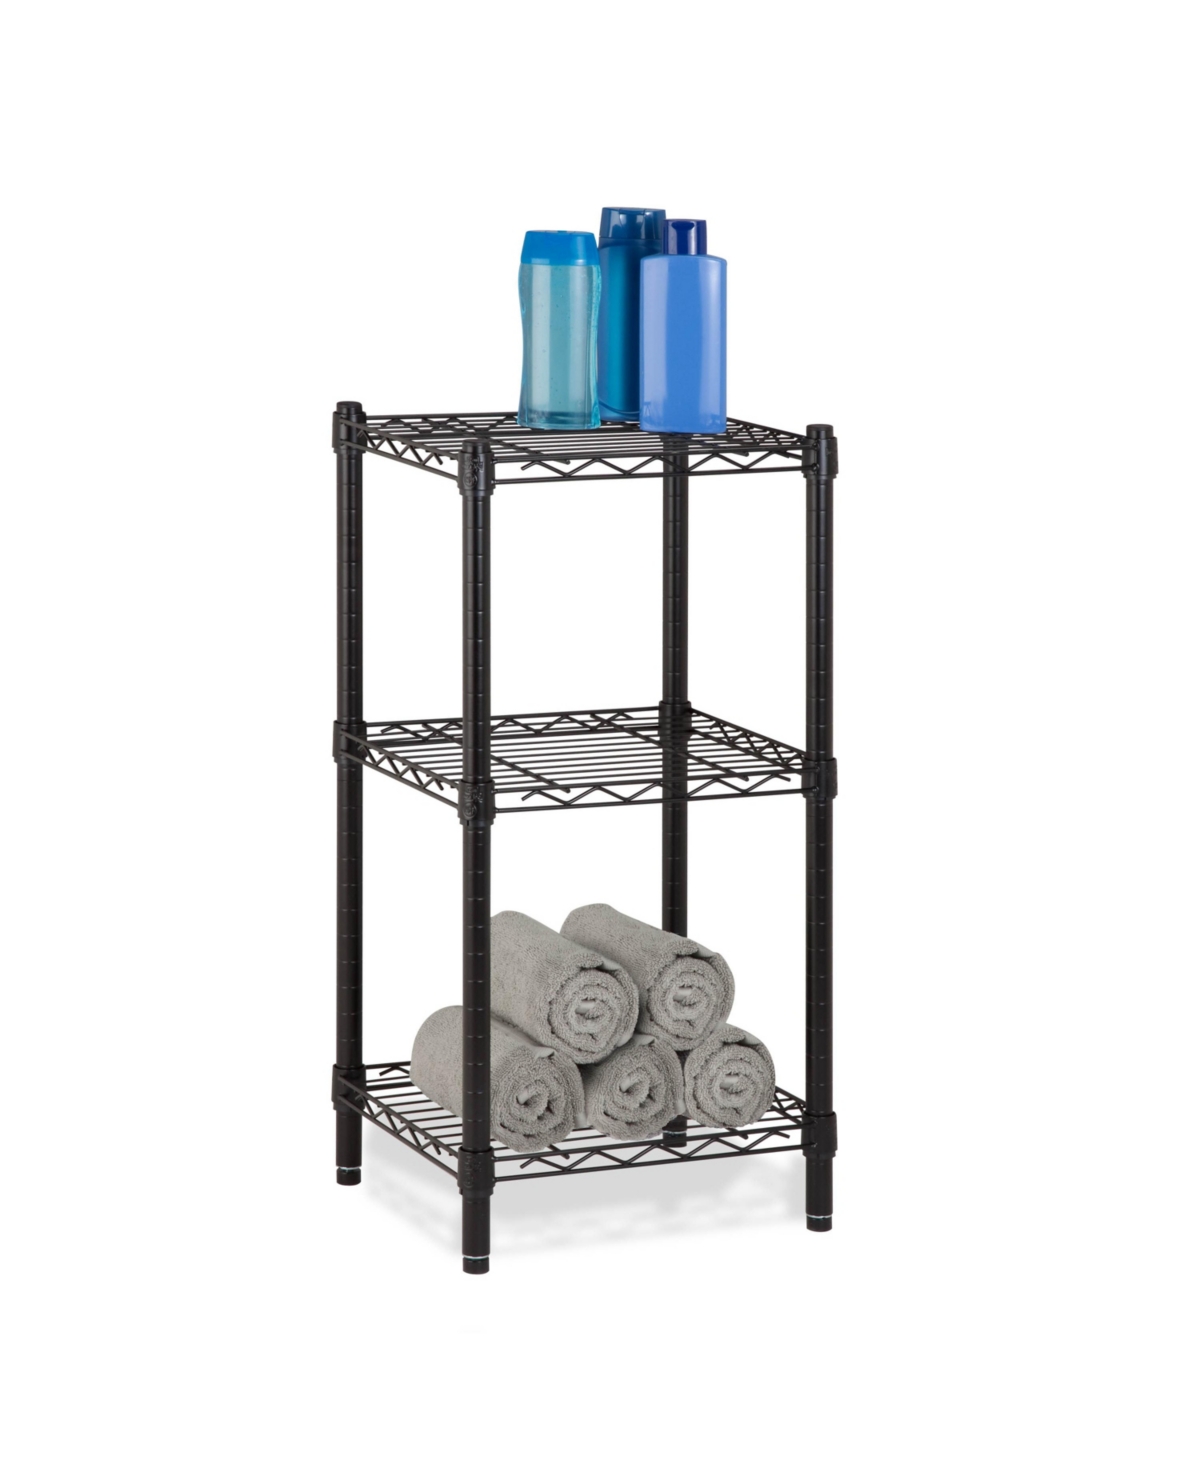 Honey Can Do 3-Tier Mesh Top Free-Standing Drying Rack, Silver/Black